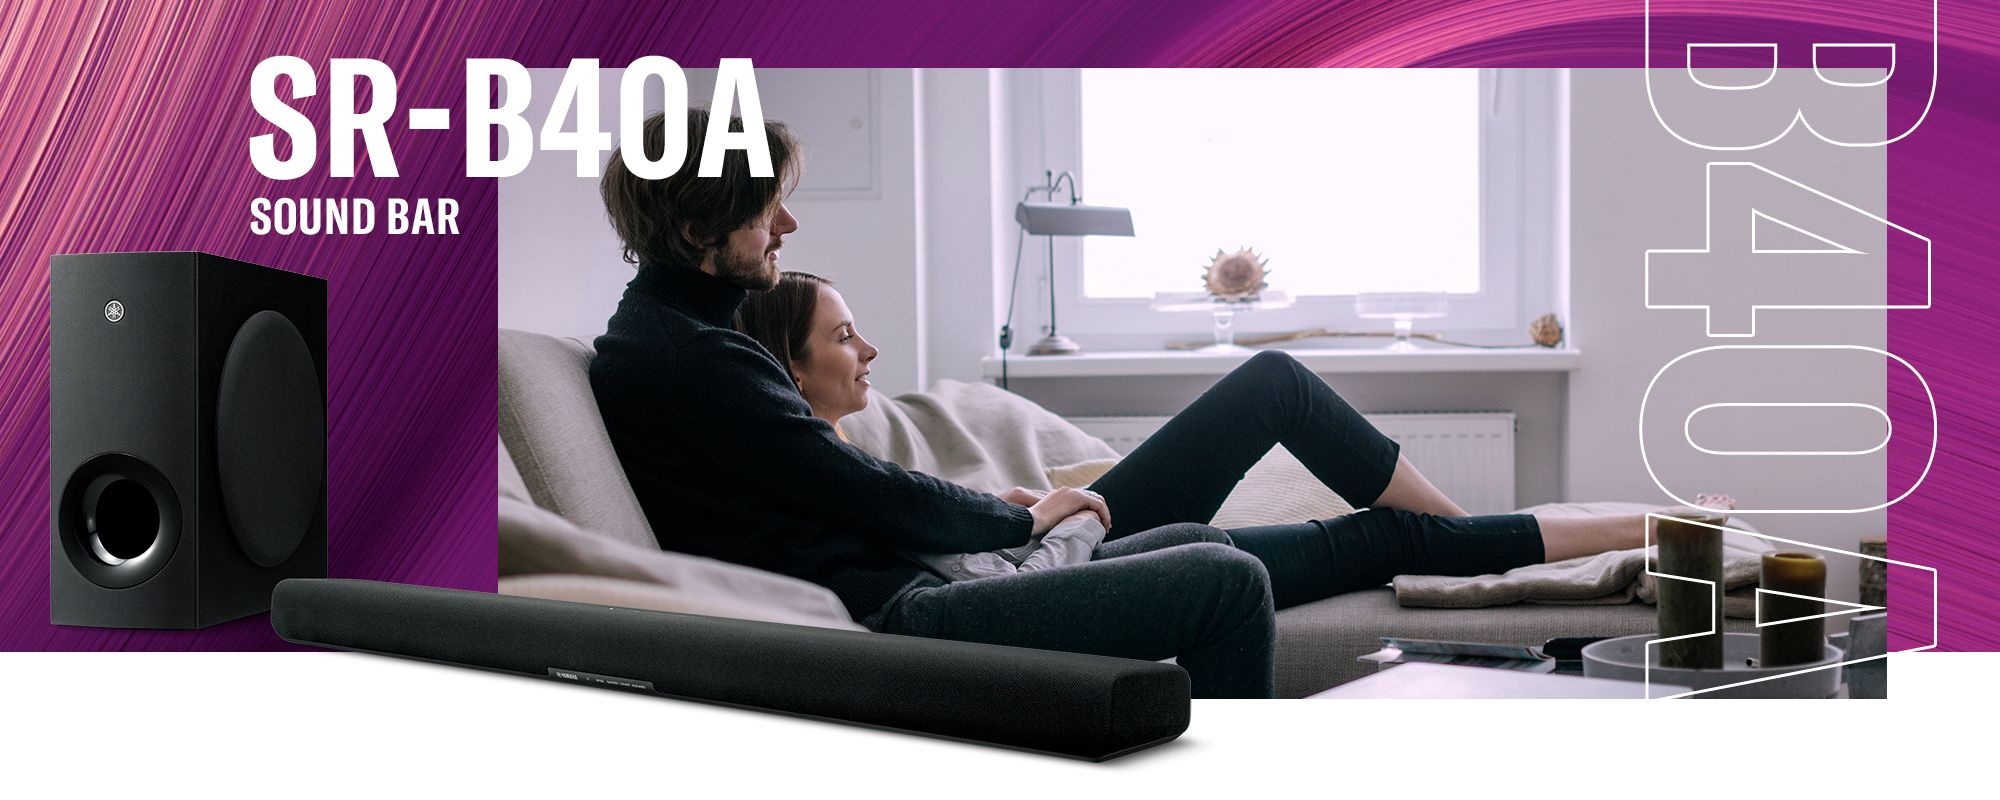 top header banner image showing Yamaha SR-B40A Dolby Atmos Sound Bar with Wireless Subwoofer and couples sitting on the couch